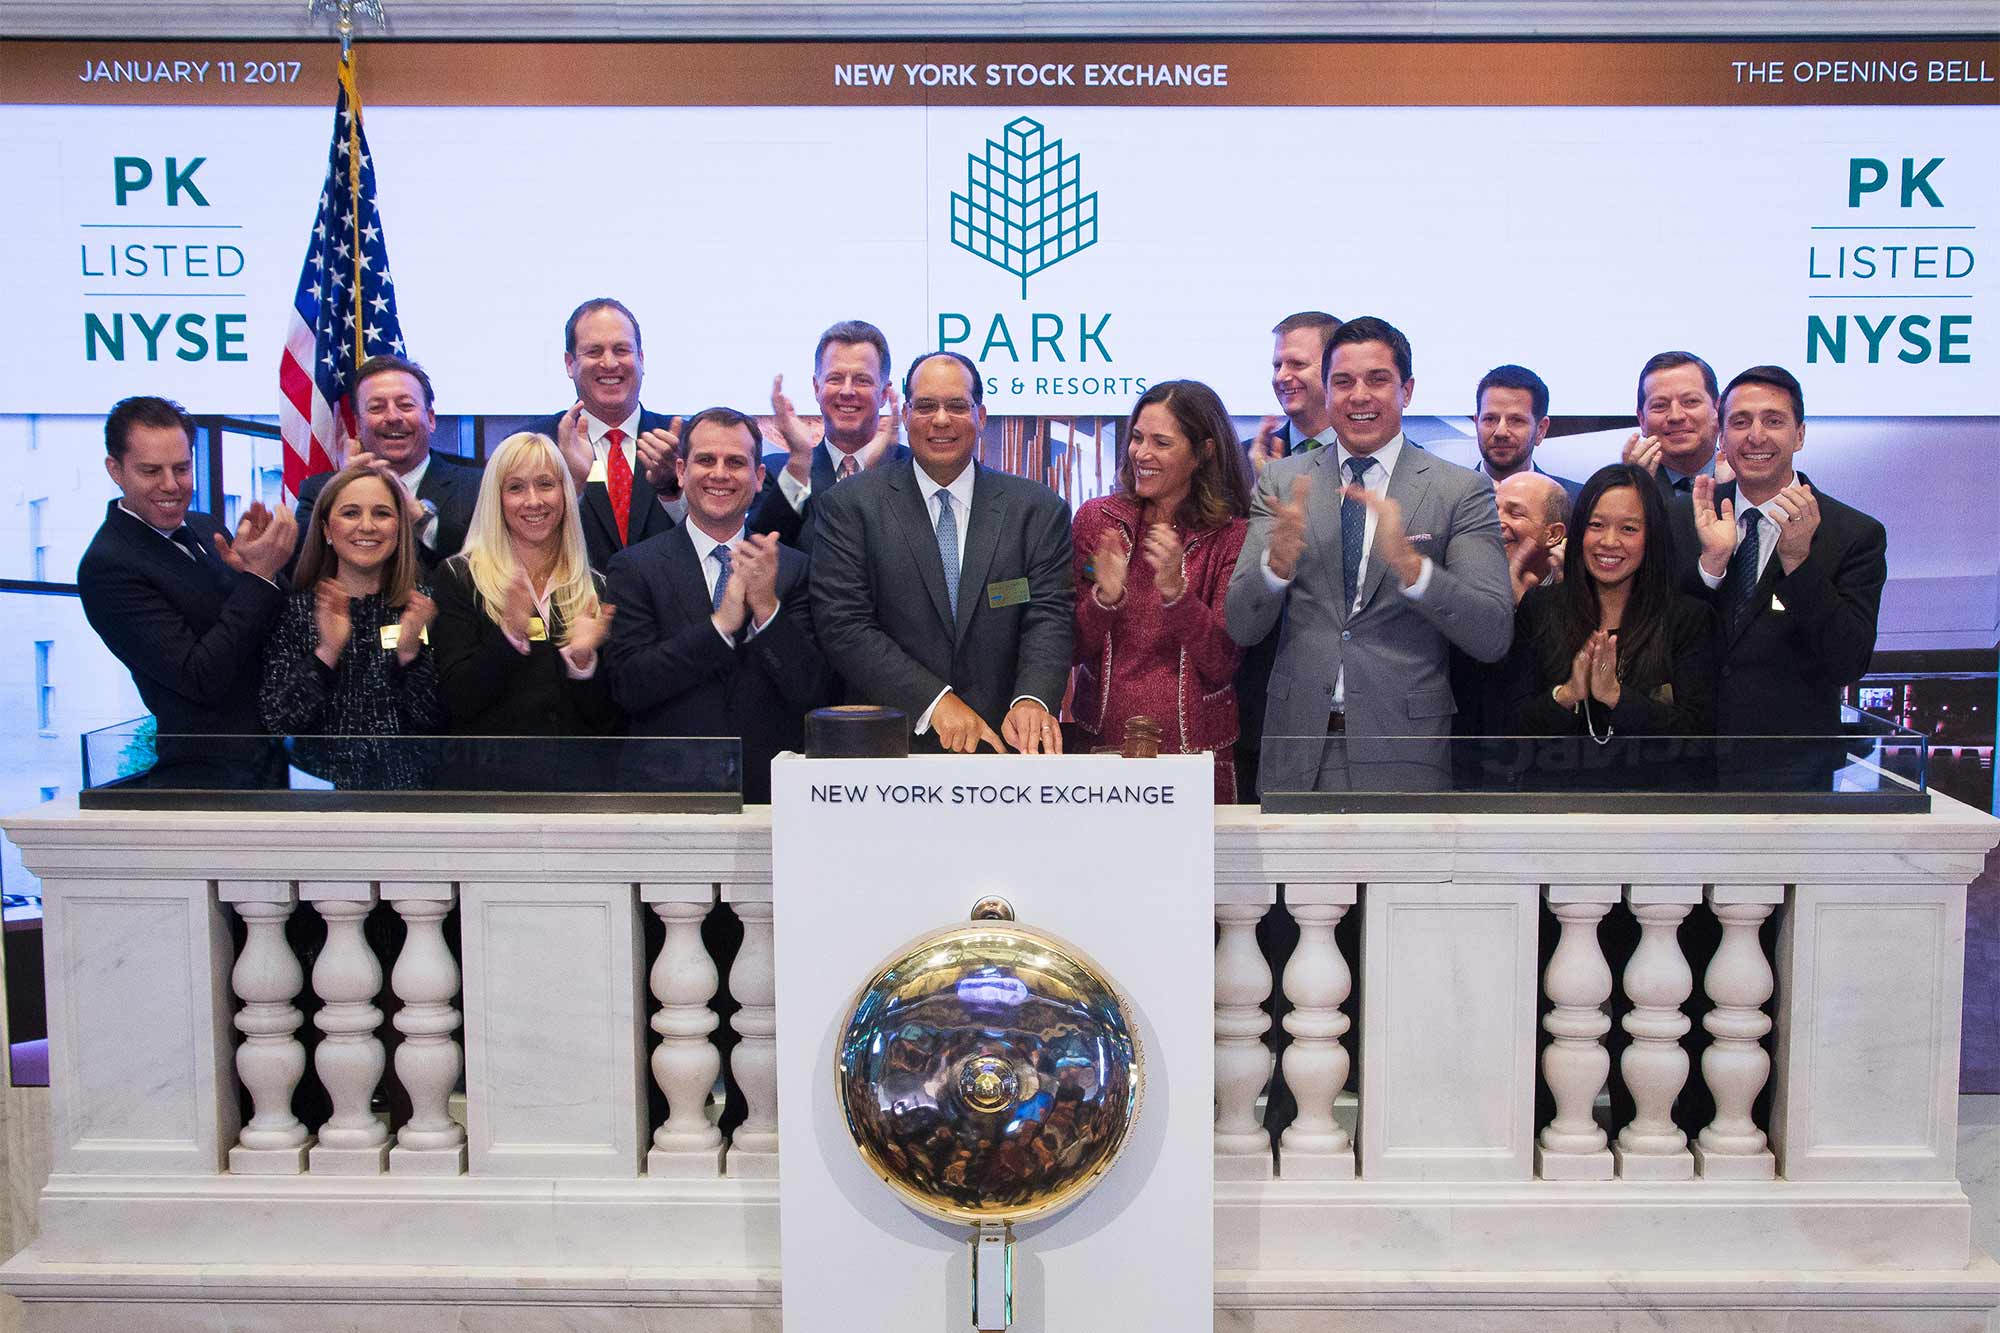 Baltimore stands behind a podium labeled New York Stock Exchange, with 15 other people, clapping and smiling